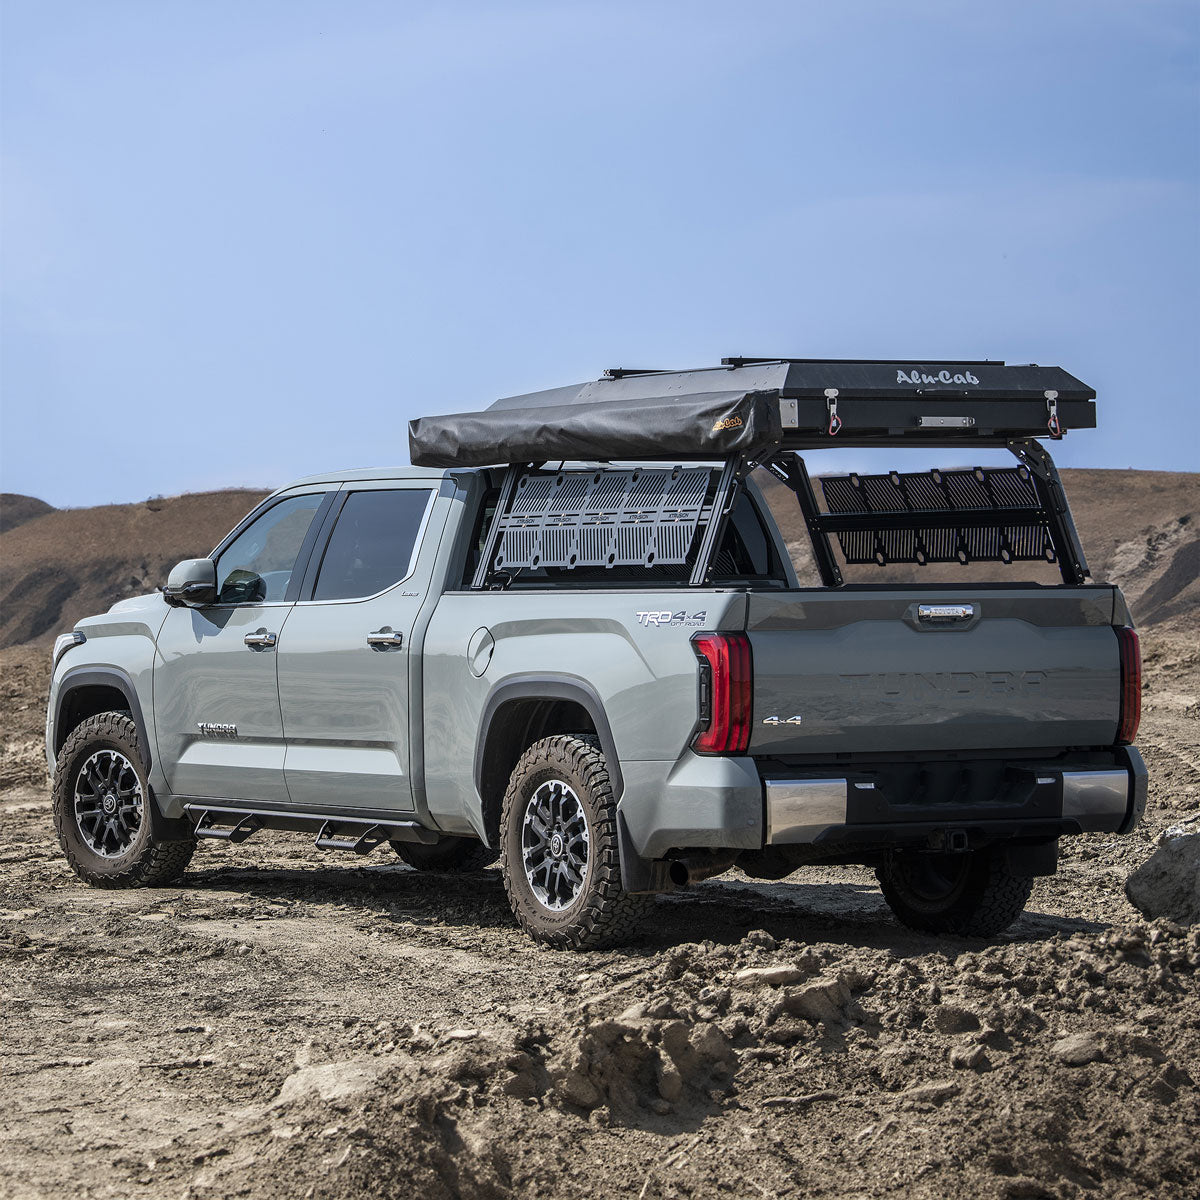 Toyota Tundra TRD Pro with XTR1 Bed Rack with Molle Panels, Awning, and RTT